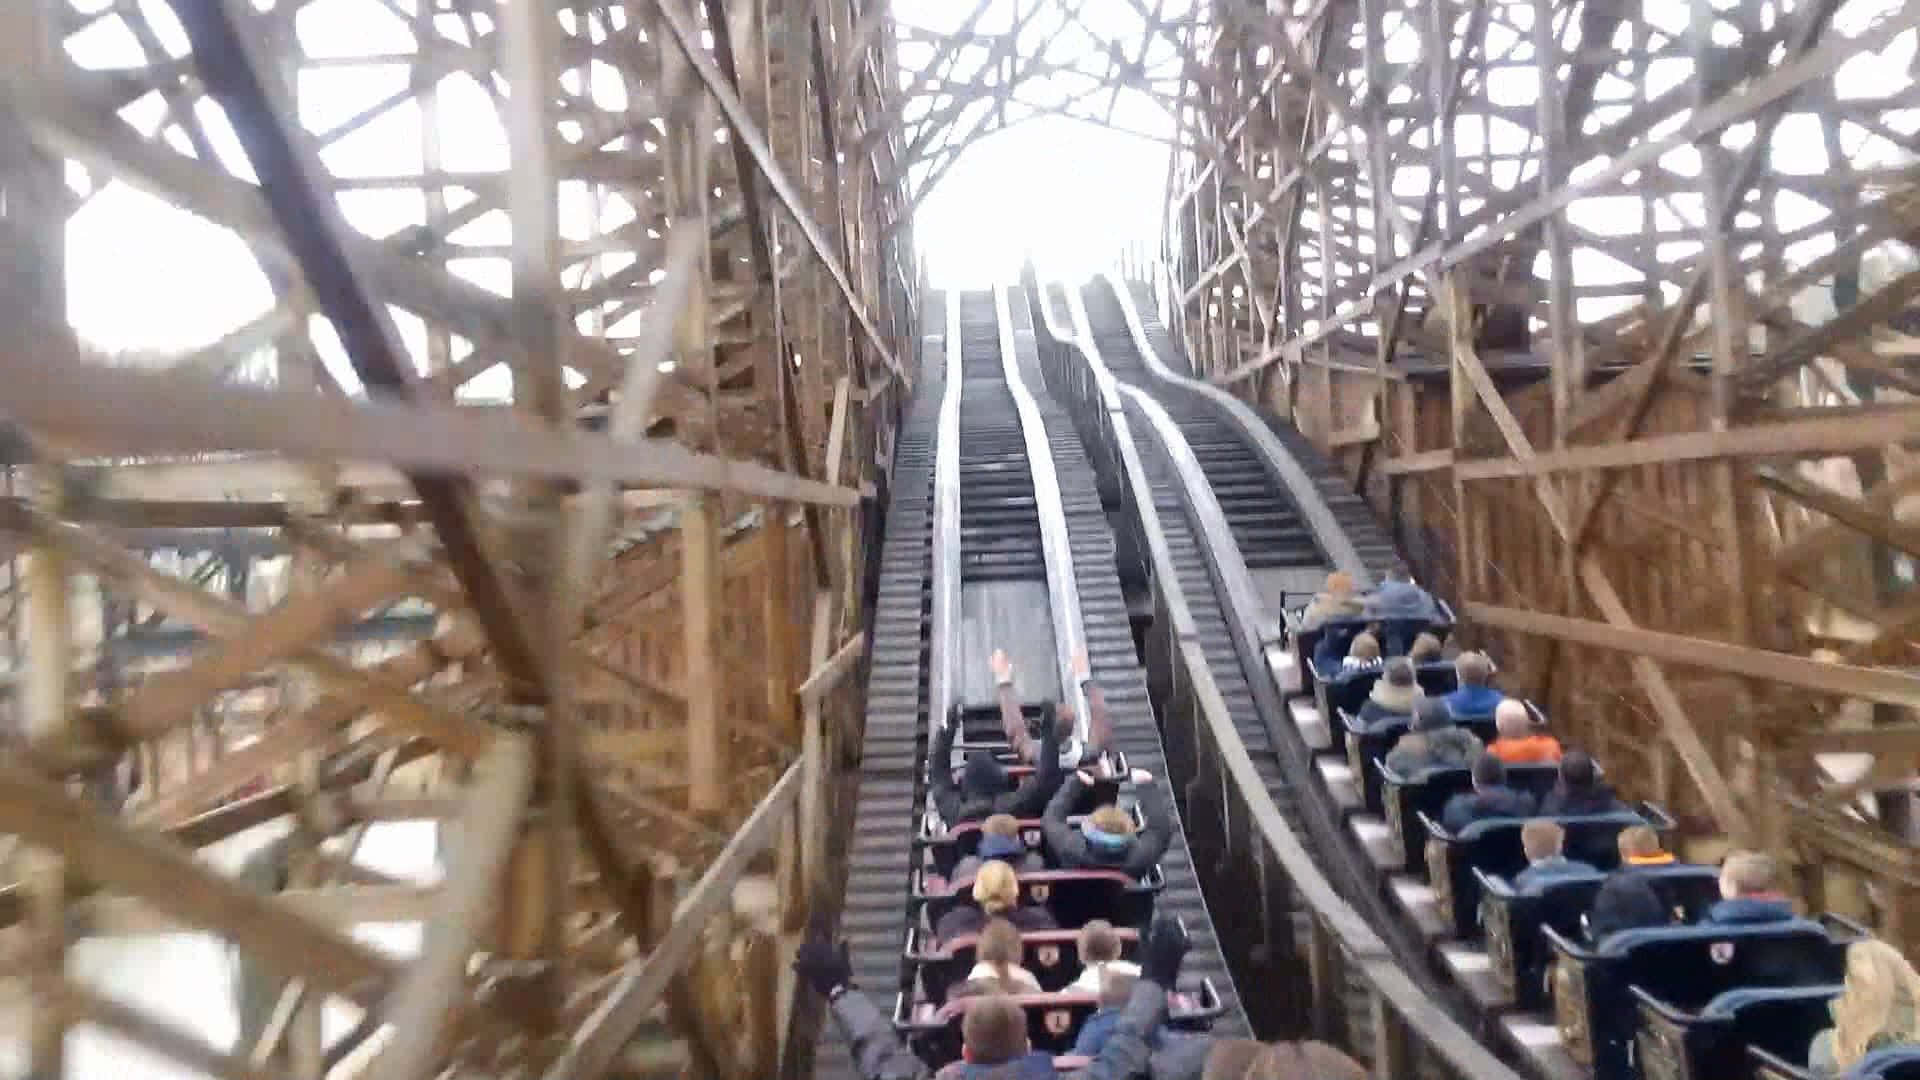 Feel the adrenaline rush of a thrilling roller coaster ride!